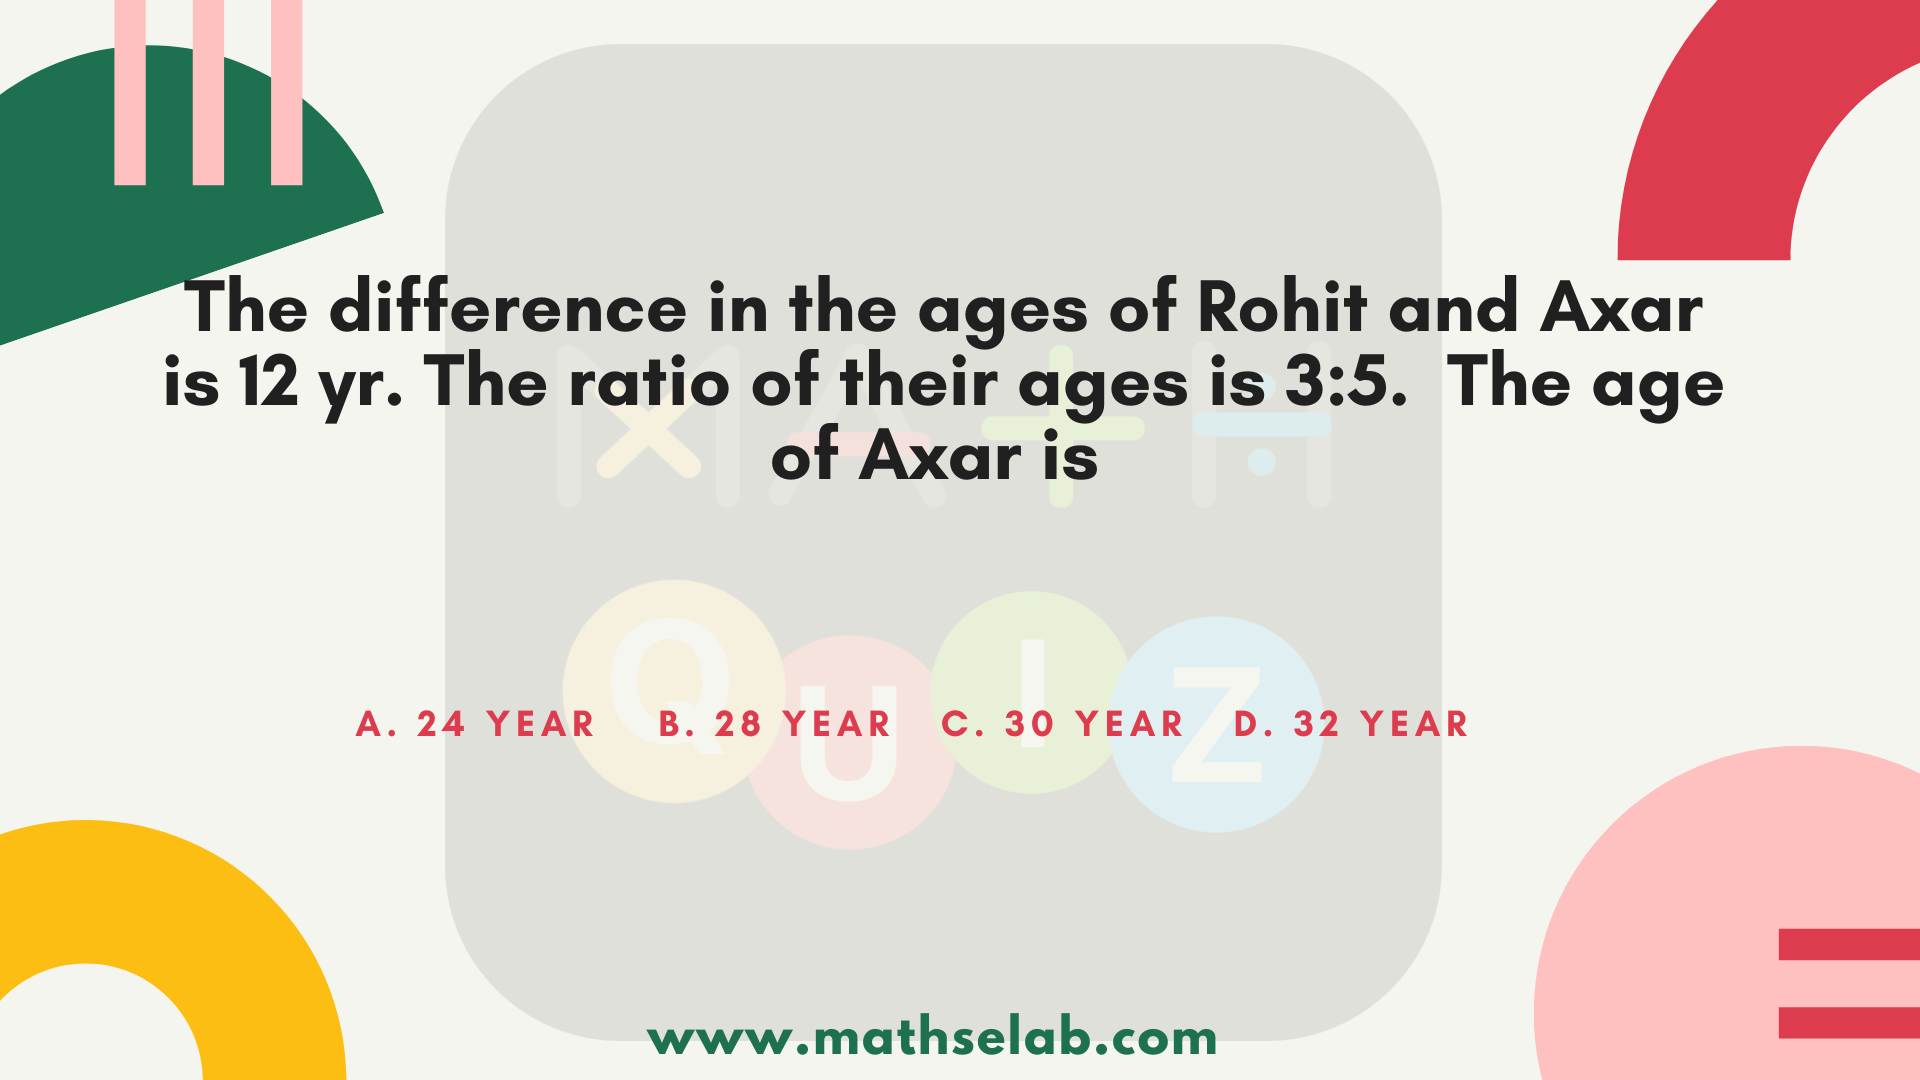 The difference in the ages of Rohit and Axar is 12 yr. The ratio of their ages is 3:5.  The age of Axar is